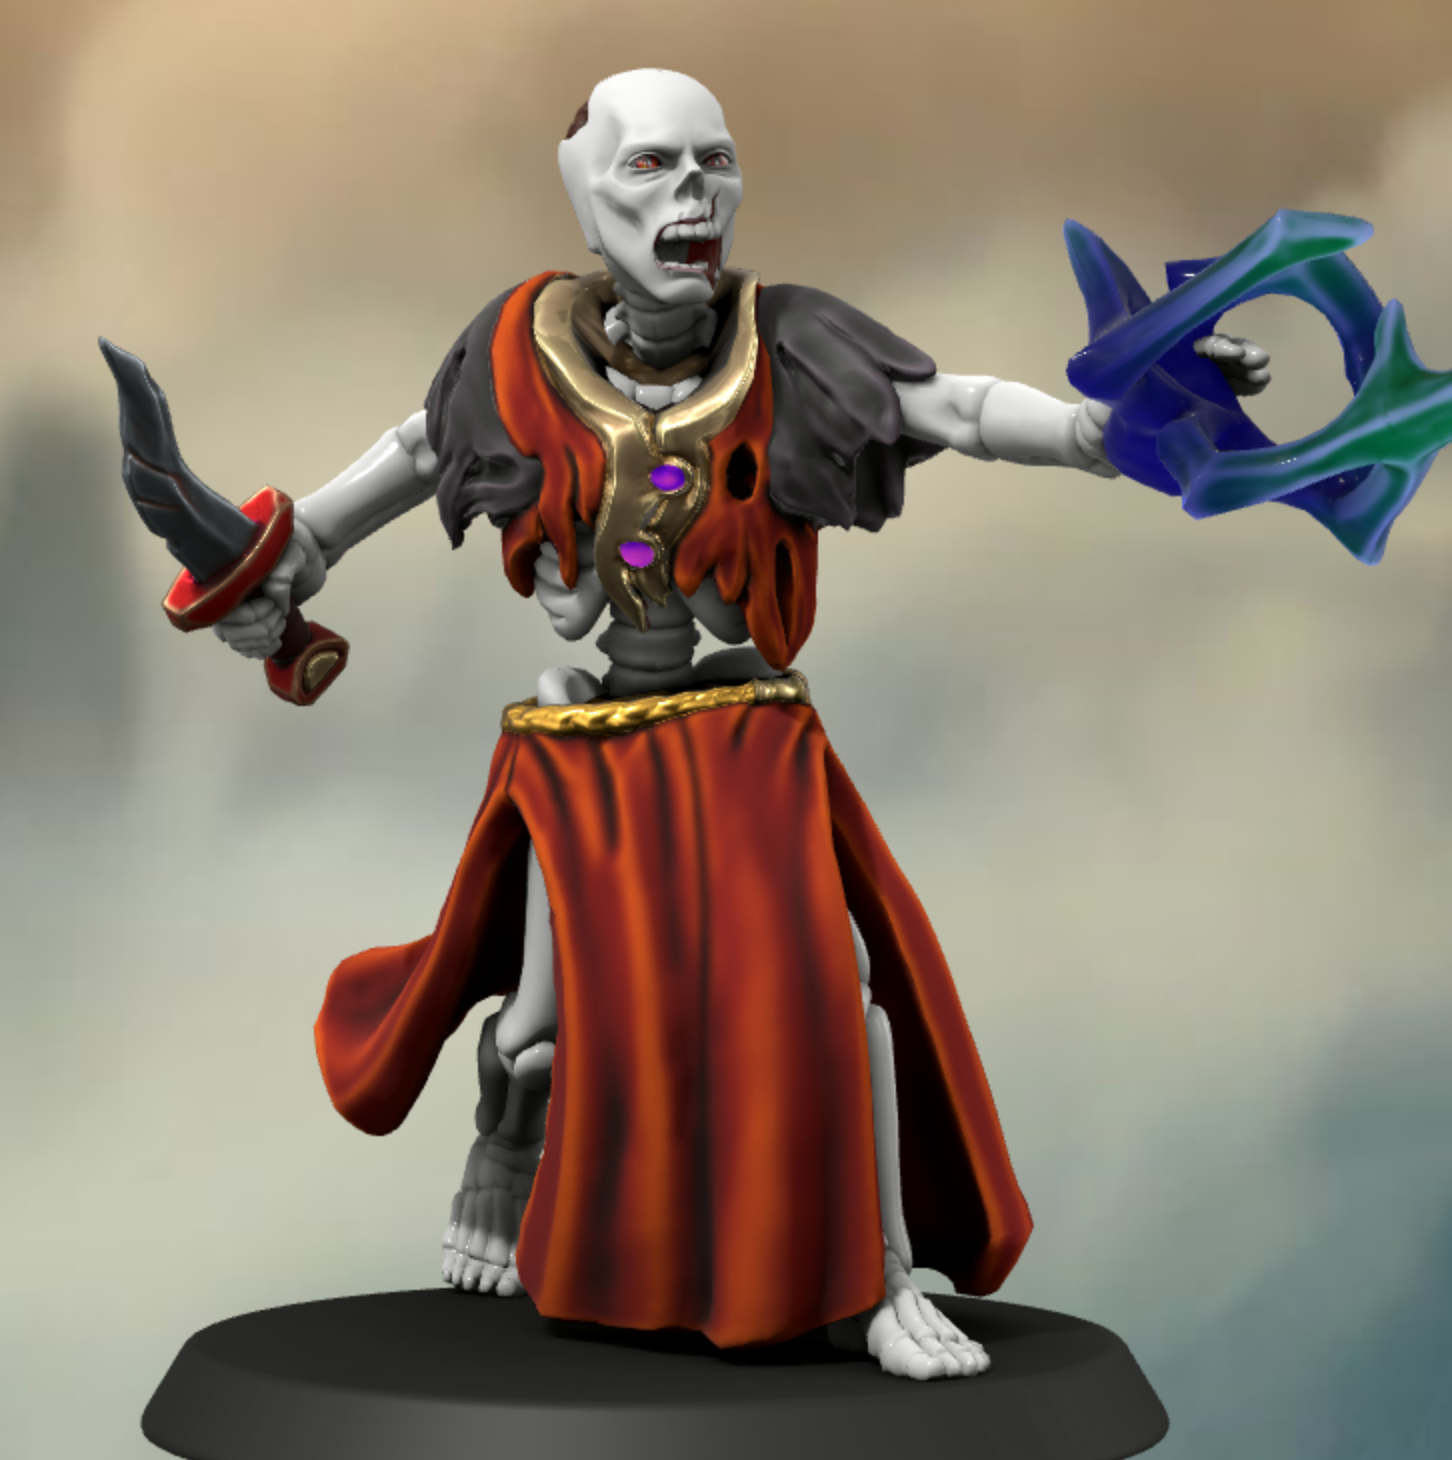 Giff - made with Hero Forge